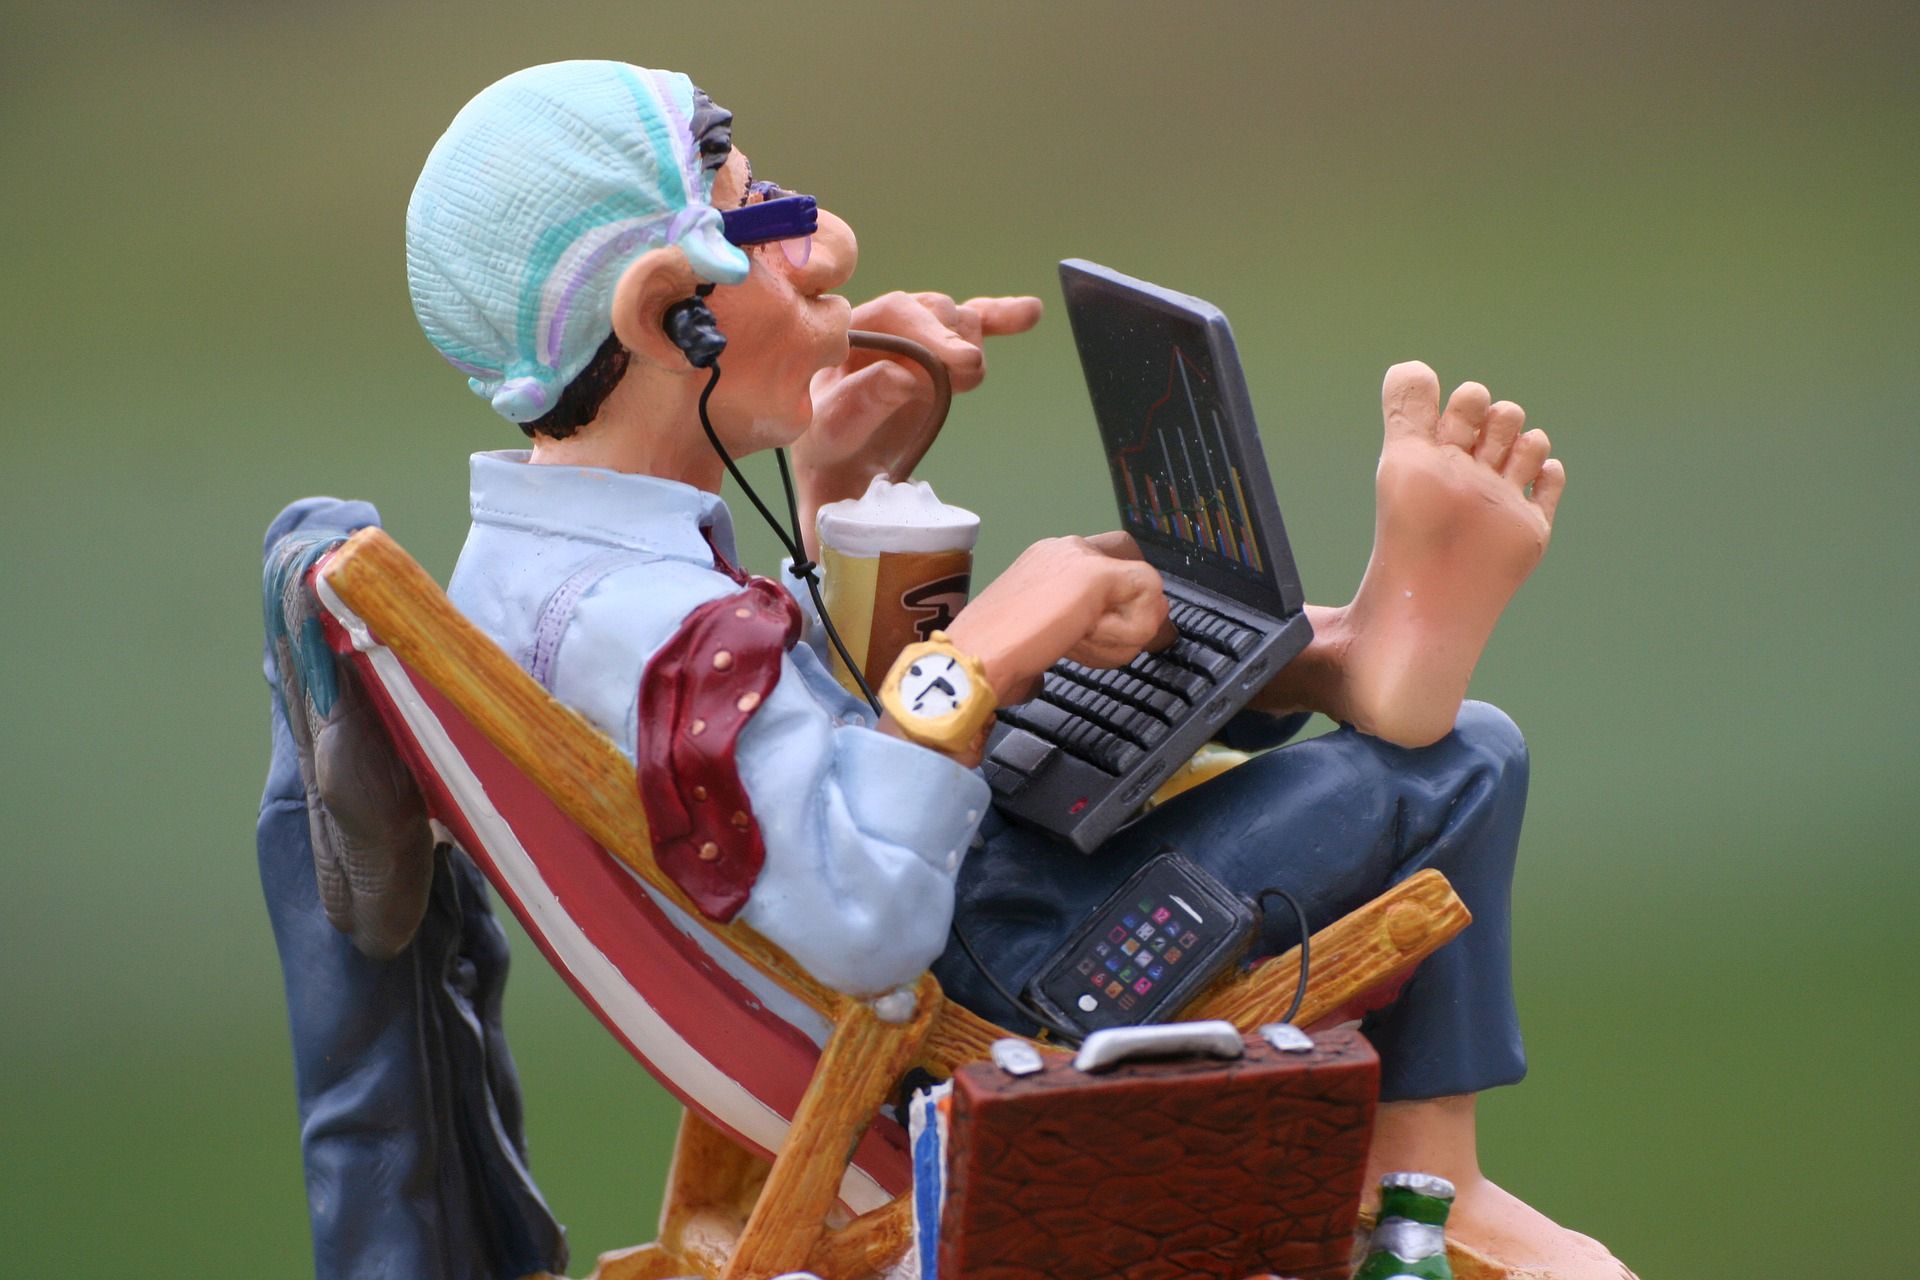 Claymation figure of a man sitting in a lounge chair barefoot while working on a laptop computer.